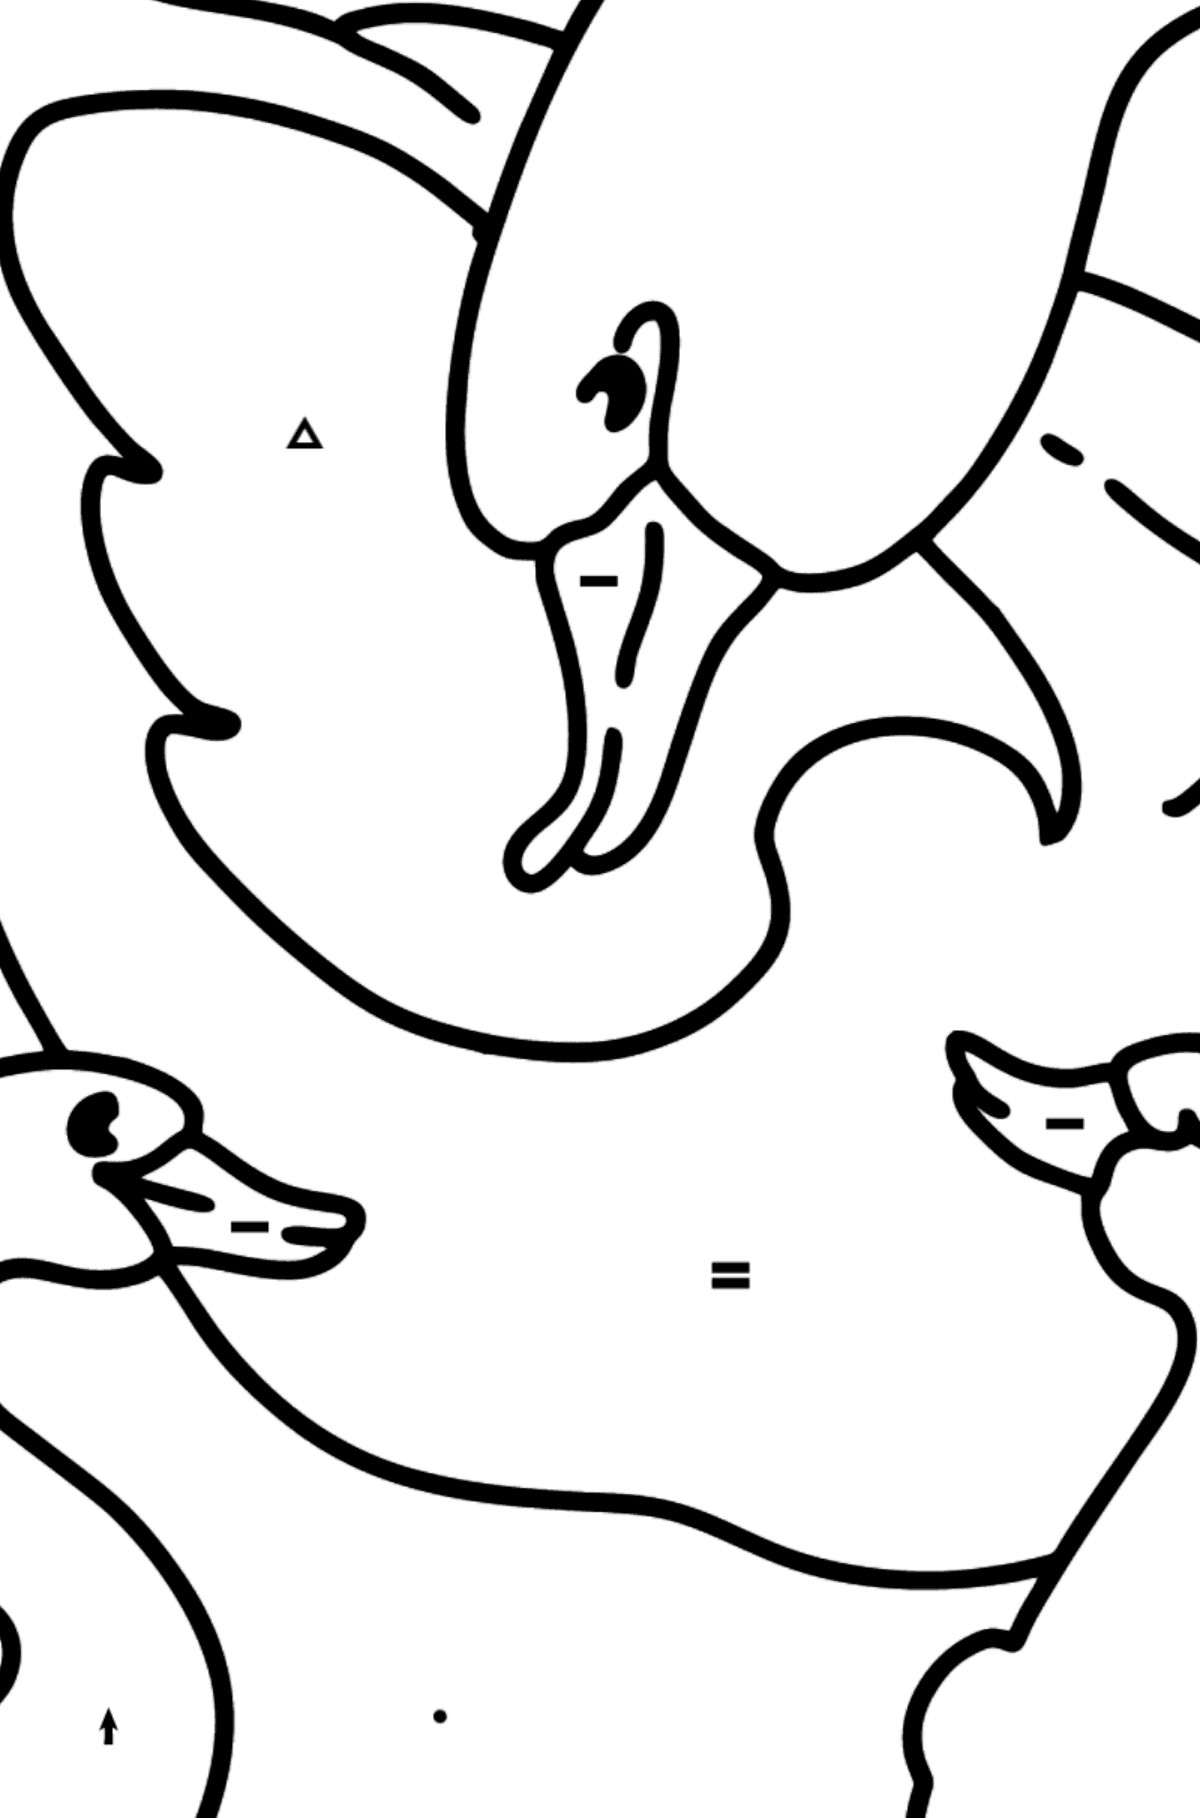 Duck with Ducklings on the Lake coloring page - Coloring by Symbols for Kids